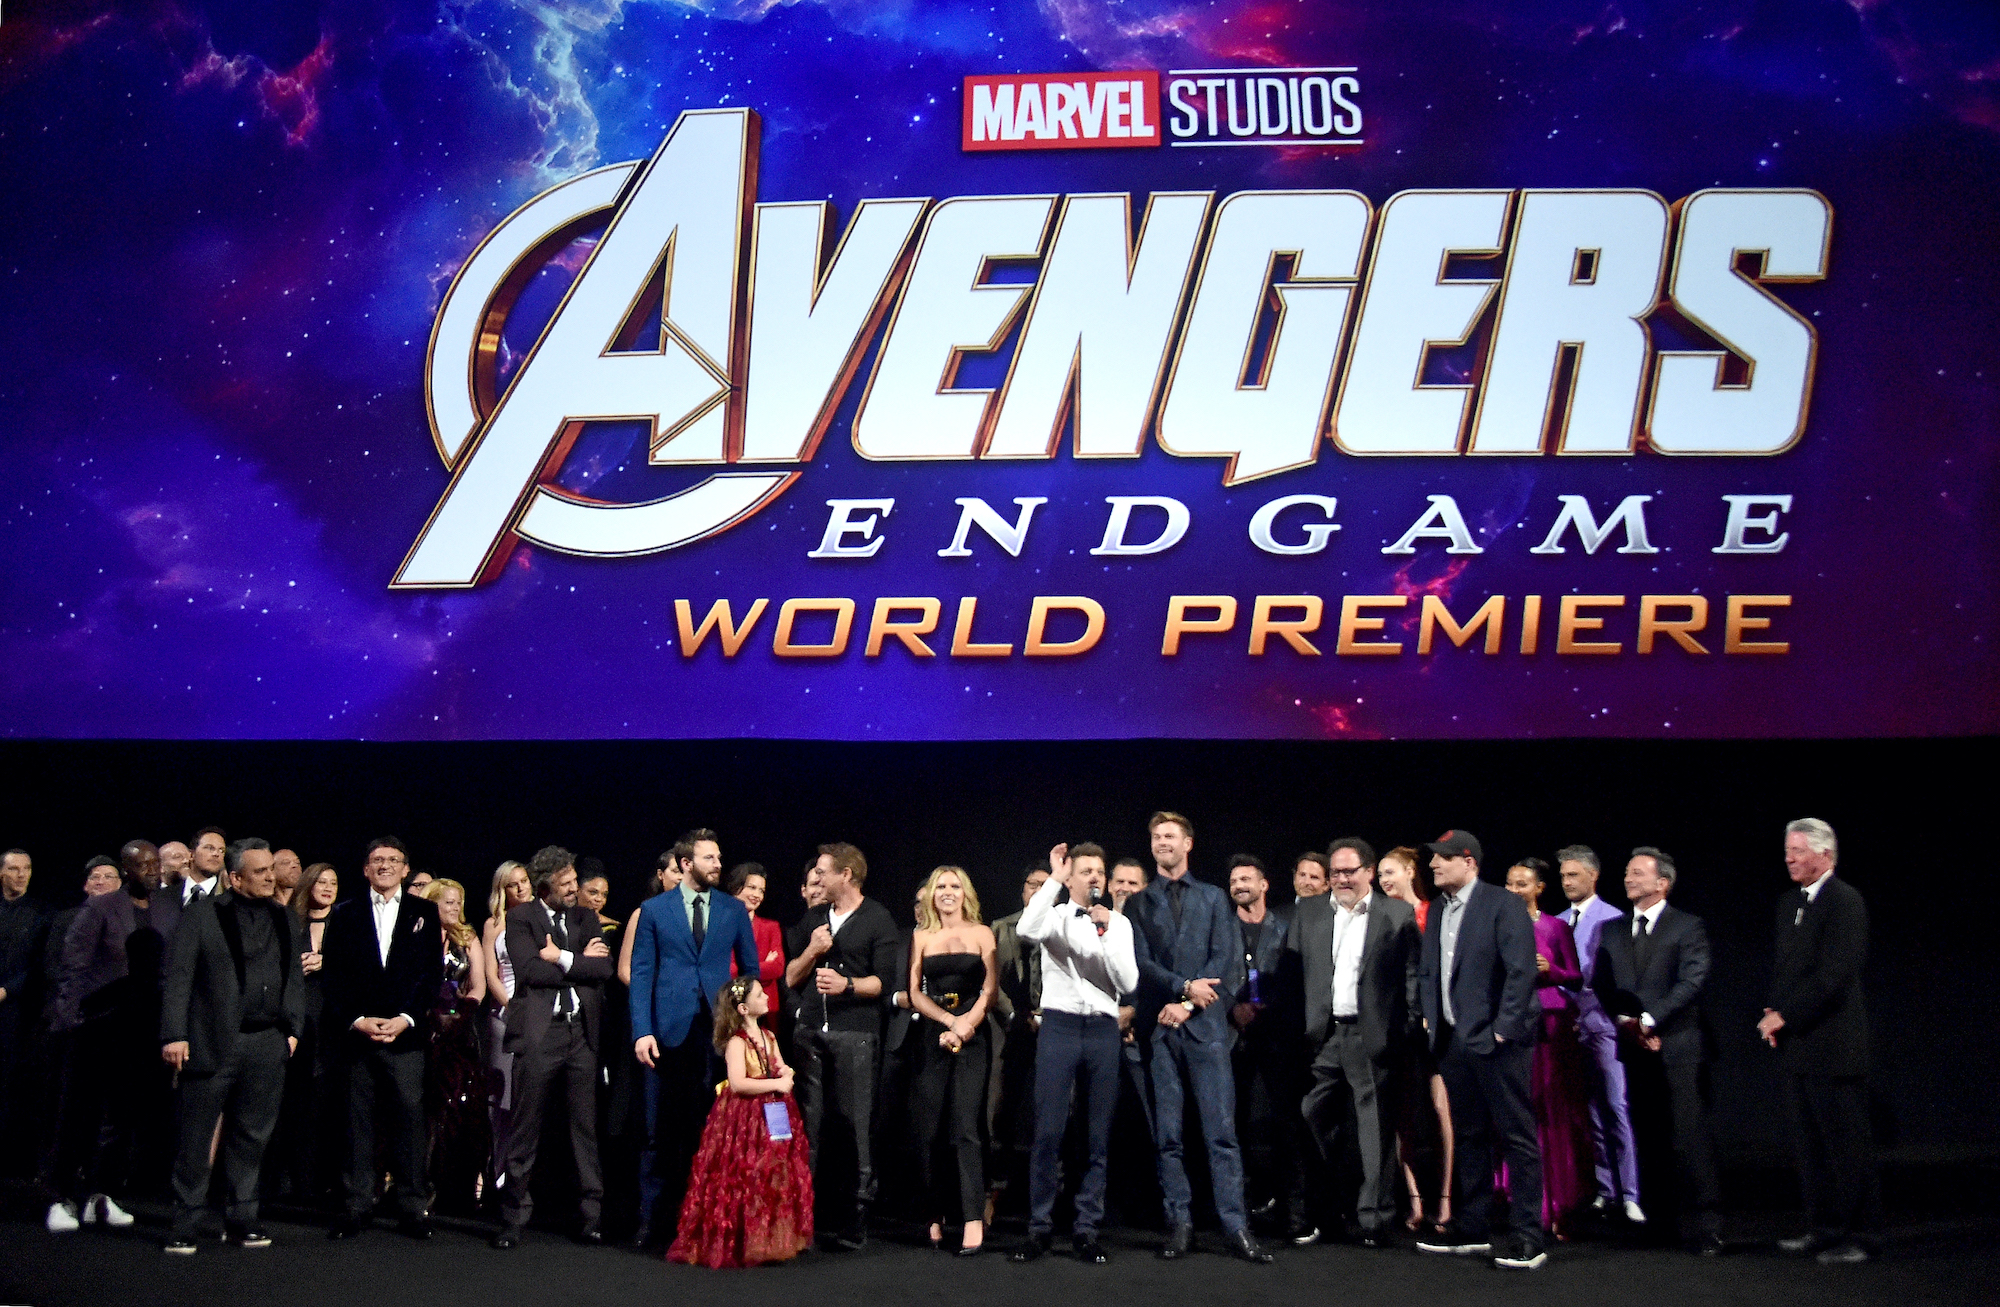 The cast and crew of Avengers: Endgame